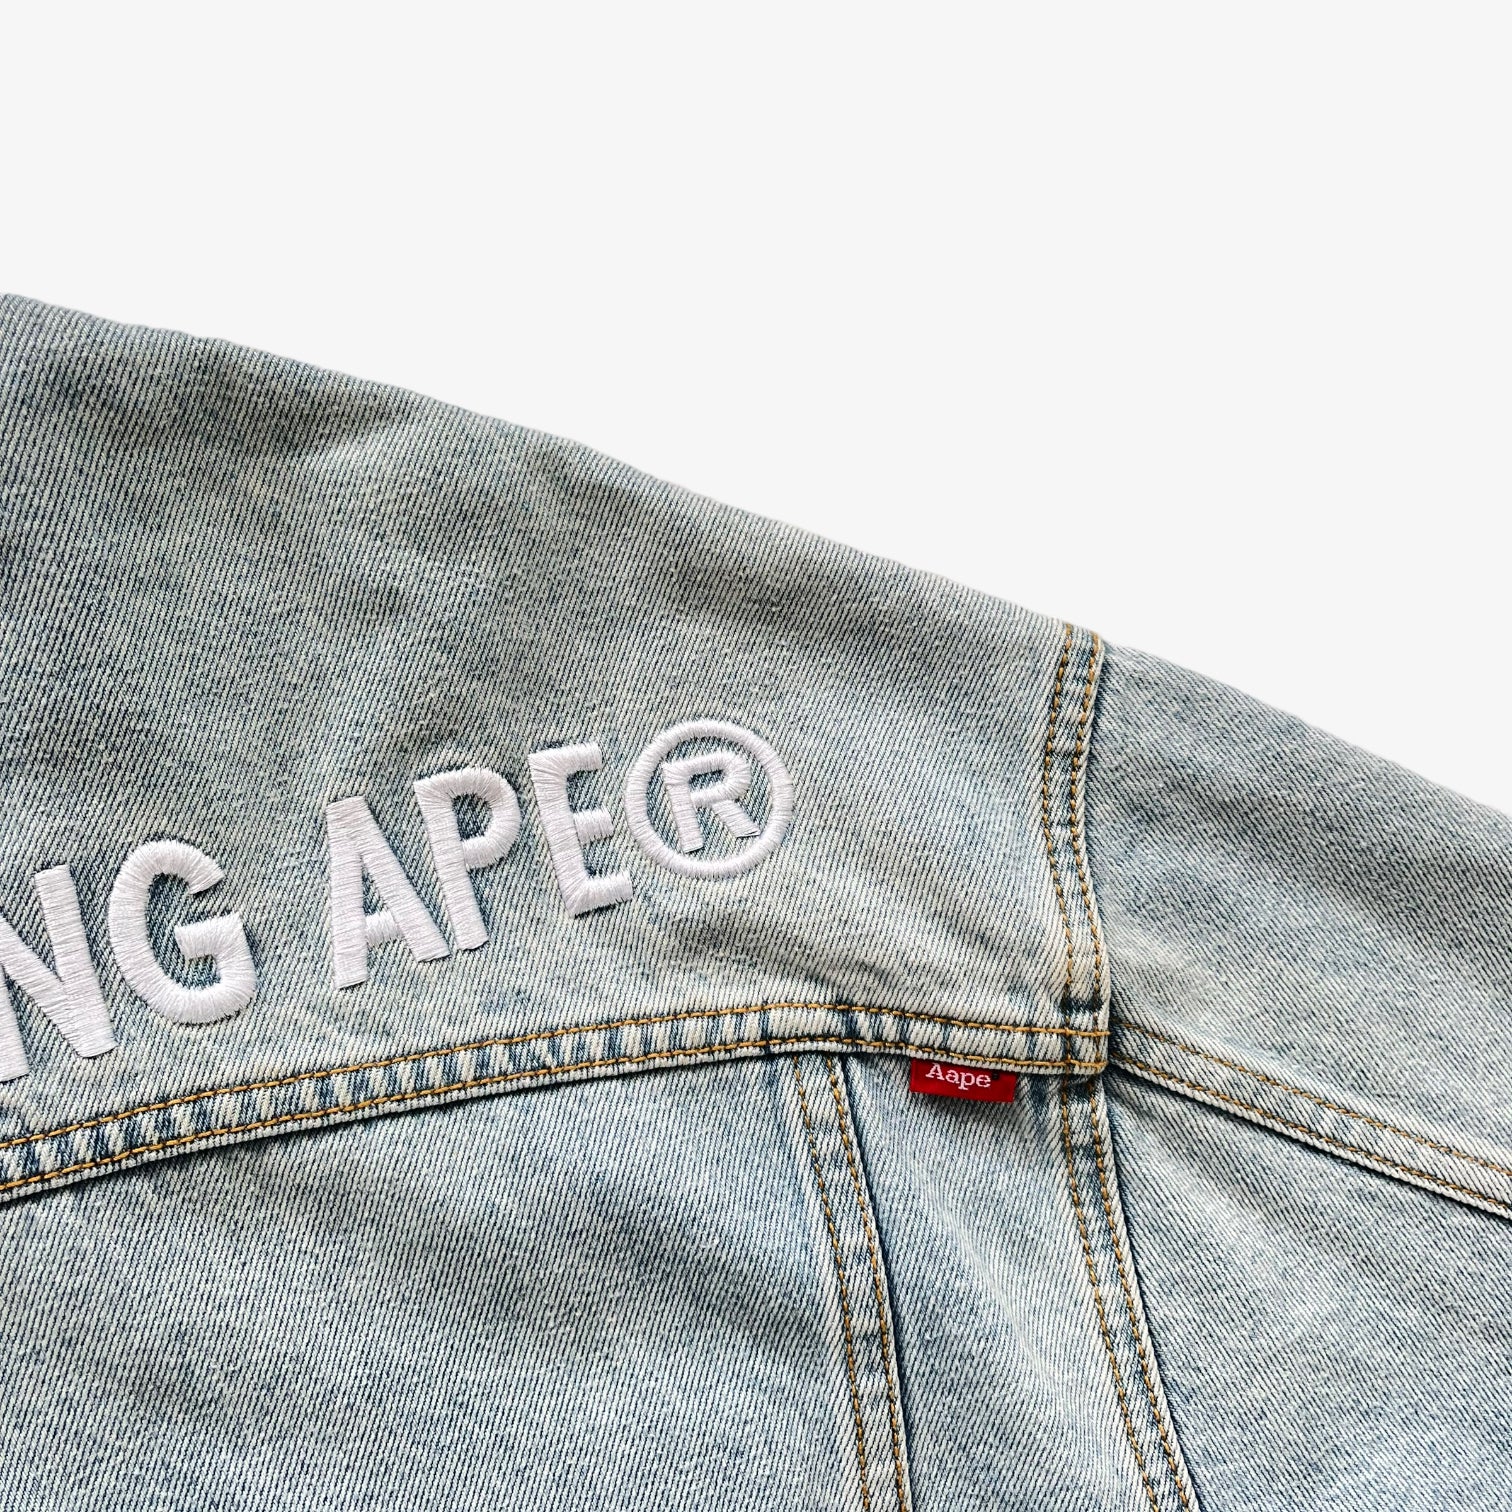 BAPE AAPE Denim Jacket With Removable Hoodie Back Tag - Casspios Dream